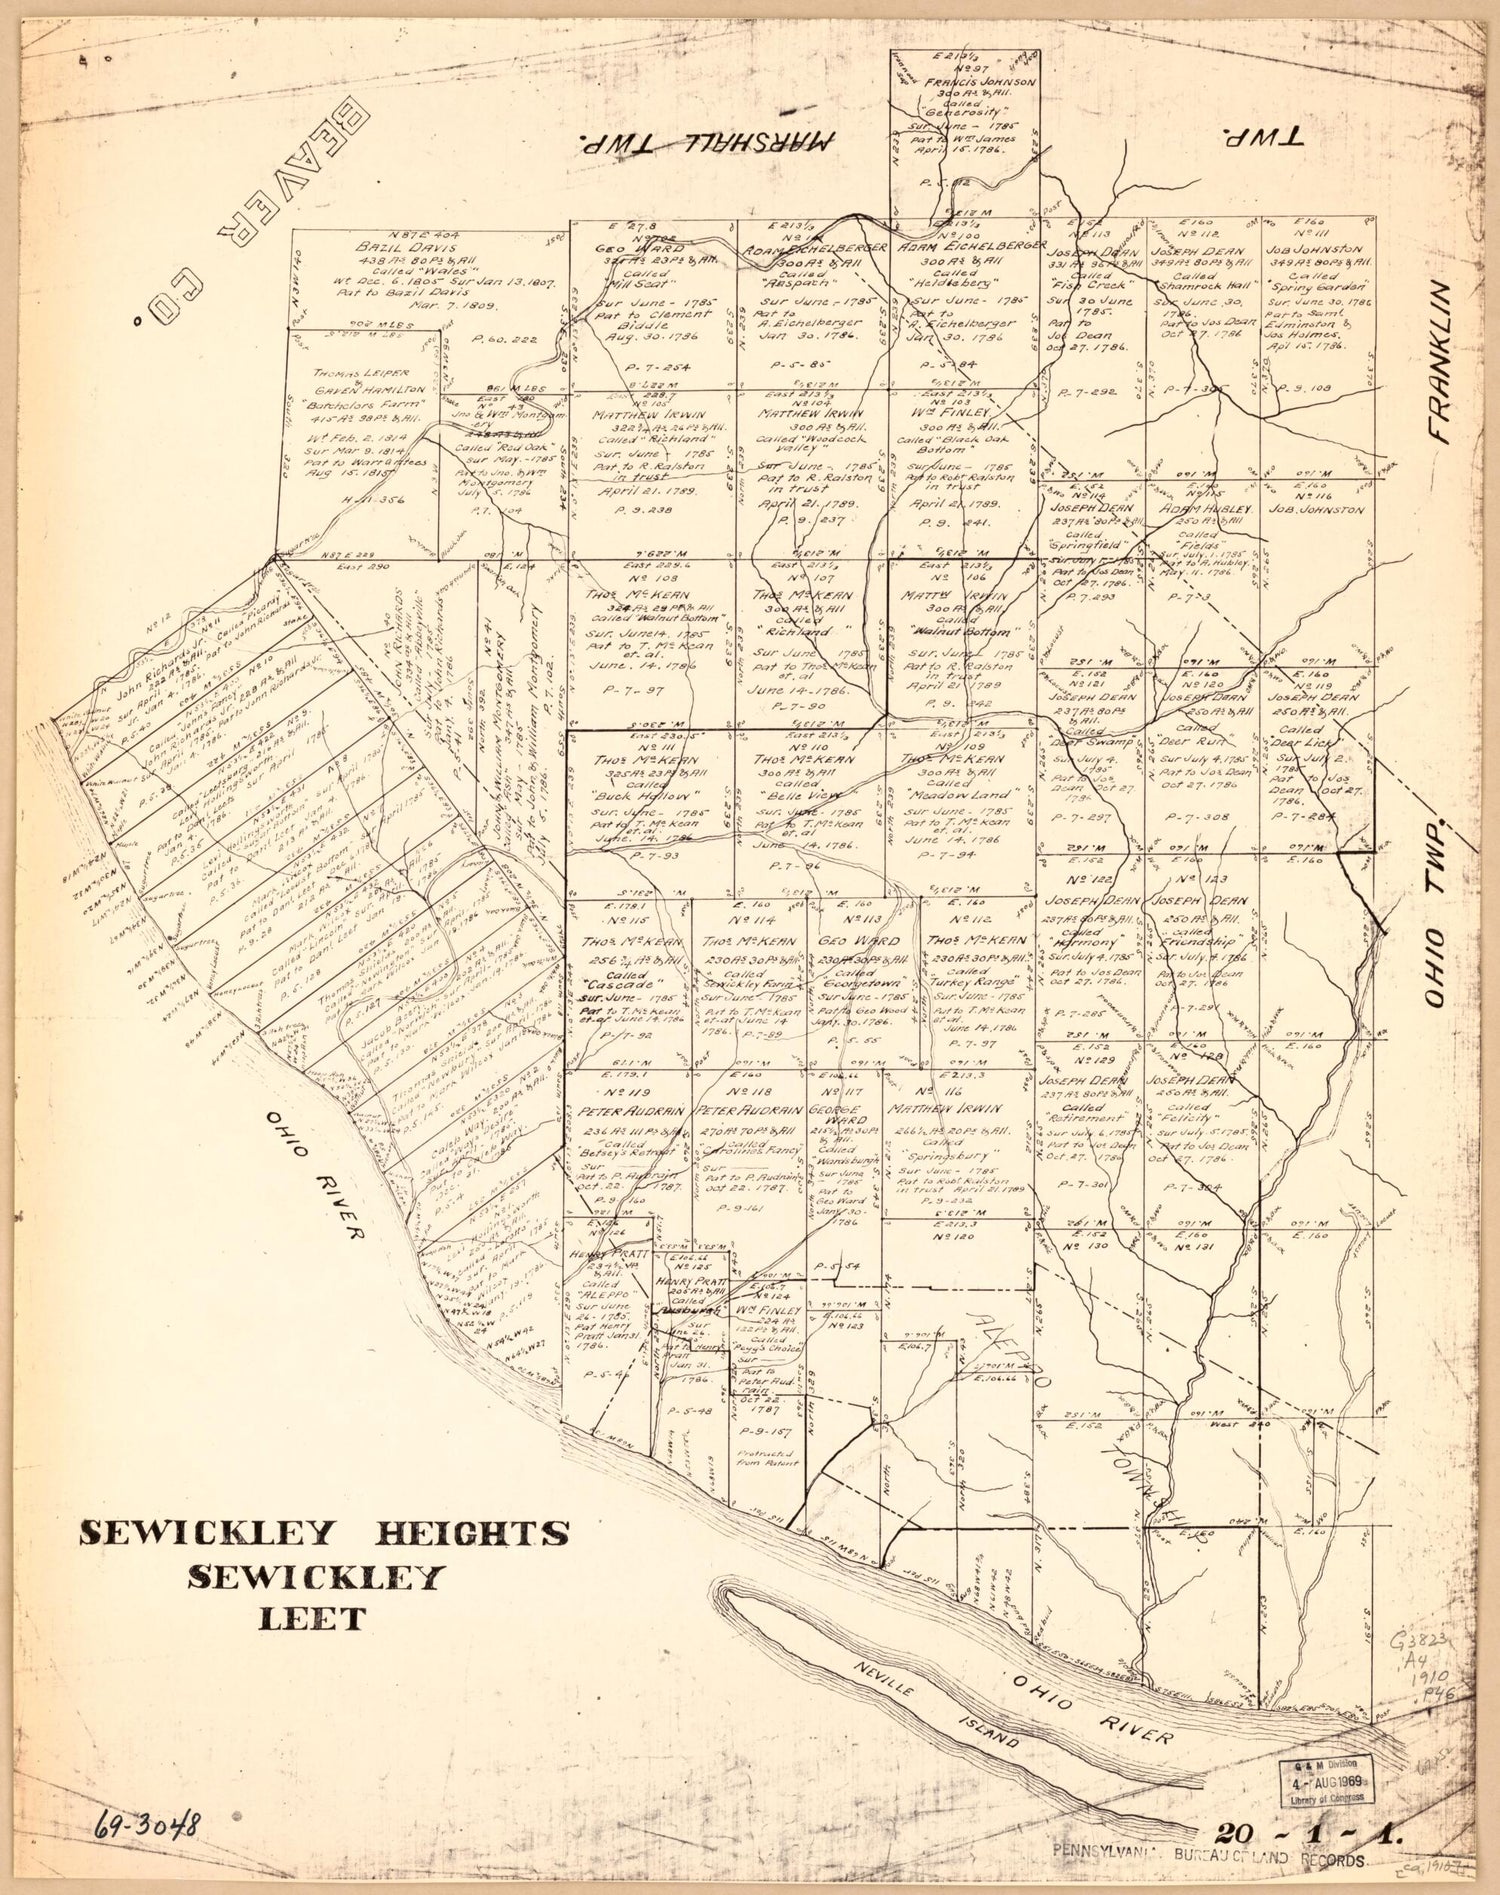 This old map of Sewickley Heights, Sewickley, Leet from 1910 was created by  [Pennsylvania. Bureau of Land Records] in 1910